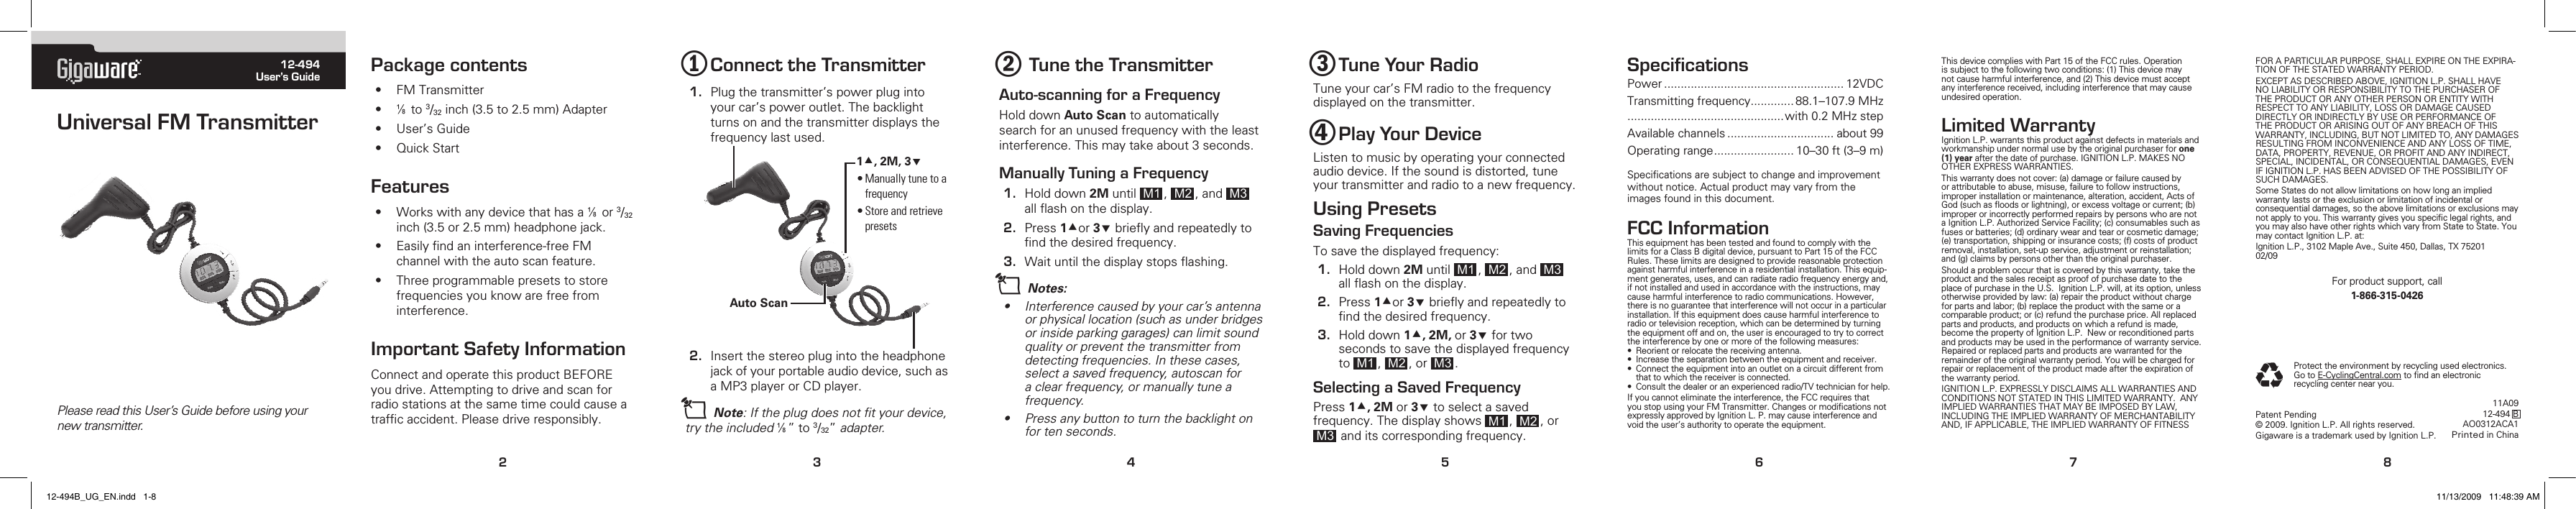 TM12-494User’s GuideUniversal FM TransmitterPlease read this User’s Guide before using your new transmitter. 2345678Package contents• FMTransmitter• Çto3/32inch(3.5to2.5mm)Adapter• User’sGuide• QuickStartFeatures• WorkswithanydevicethathasaÇor3/32inch(3.5or2.5mm)headphonejack.• Easilyndaninterference-freeFMchannelwiththeautoscanfeature.• Threeprogrammablepresetstostorefrequenciesyouknowarefreefrominterference.Important Safety InformationConnectandoperatethisproductBEFOREyoudrive.Attemptingtodriveandscanforradiostationsatthesametimecouldcauseatrafcaccident.Pleasedriveresponsibly.3 Tune Your RadioTuneyourcar’sFMradiotothefrequencydisplayedonthetransmitter.4 Play Your DeviceListentomusicbyoperatingyourconnectedaudiodevice.Ifthesoundisdistorted,tuneyourtransmitterandradiotoanewfrequency.Using PresetsSaving FrequenciesTosavethedisplayedfrequency:1. Holddown2M until M1 , M2 ,and M3 allashonthedisplay.2. Press1or3brieyandrepeatedlytondthedesiredfrequency.3. Holddown1, 2M, or3 fortwosecondstosavethedisplayedfrequencyto M1 , M2 ,or M3 .Selecting a Saved FrequencyPress1, 2M or3 toselectasavedfrequency.Thedisplayshows M1 , M2 ,orM3 anditscorrespondingfrequency.SpeciﬁcationsPower...................................................... 12VDCTransmittingfrequency............. 88.1–107.9MHz...............................................with0.2MHzstepAvailablechannels................................ about99Operatingrange........................ 10–30ft(3–9m)Specicationsaresubjecttochangeandimprovementwithoutnotice.Actualproductmayvaryfromtheimagesfoundinthisdocument.FCC InformationThisequipmenthasbeentestedandfoundtocomplywiththelimitsforaClassBdigitaldevice,pursuanttoPart15oftheFCCRules.Theselimitsaredesignedtoprovidereasonableprotectionagainstharmfulinterferenceinaresidentialinstallation.Thisequip-mentgenerates,uses,andcanradiateradiofrequencyenergyand,ifnotinstalledandusedinaccordancewiththeinstructions,maycauseharmfulinterferencetoradiocommunications.However,thereisnoguaranteethatinterferencewillnotoccurinaparticularinstallation.Ifthisequipmentdoescauseharmfulinterferencetoradioortelevisionreception,whichcanbedeterminedbyturningtheequipmentoffandon,theuserisencouragedtotrytocorrecttheinterferencebyoneormoreofthefollowingmeasures:• Reorientorrelocatethereceivingantenna.• Increasetheseparationbetweentheequipmentandreceiver.• Connecttheequipmentintoanoutletonacircuitdifferentfromthattowhichthereceiverisconnected.• Consultthedealeroranexperiencedradio/TVtechnicianforhelp.Ifyoucannoteliminatetheinterference,theFCCrequiresthatyoustopusingyourFMTransmitter.ChangesormodicationsnotexpresslyapprovedbyIgnitionL.P.maycauseinterferenceandvoidtheuser’sauthoritytooperatetheequipment.ThisdevicecomplieswithPart15oftheFCCrules.Operationissubjecttothefollowingtwoconditions:(1)Thisdevicemaynotcauseharmfulinterference,and(2)Thisdevicemustacceptanyinterferencereceived,includinginterferencethatmaycauseundesiredoperation.Limited WarrantyIgnitionL.P.warrantsthisproductagainstdefectsinmaterialsandworkmanshipundernormalusebytheoriginalpurchaserforone (1) yearafterthedateofpurchase.IGNITIONL.P.MAKESNOOTHEREXPRESSWARRANTIES.Thiswarrantydoesnotcover:(a)damageorfailurecausedbyorattributabletoabuse,misuse,failuretofollowinstructions,improperinstallationormaintenance,alteration,accident,ActsofGod(suchasoodsorlightning),orexcessvoltageorcurrent;(b)improperorincorrectlyperformedrepairsbypersonswhoarenotaIgnitionL.P.AuthorizedServiceFacility;(c)consumablessuchasfusesorbatteries;(d)ordinarywearandtearorcosmeticdamage;(e)transportation,shippingorinsurancecosts;(f)costsofproductremoval,installation,set-upservice,adjustmentorreinstallation;and(g)claimsbypersonsotherthantheoriginalpurchaser.Shouldaproblemoccurthatiscoveredbythiswarranty,taketheproductandthesalesreceiptasproofofpurchasedatetotheplaceofpurchaseintheU.S.IgnitionL.P.will,atitsoption,unlessotherwiseprovidedbylaw:(a)repairtheproductwithoutchargeforpartsandlabor;(b)replacetheproductwiththesameoracomparableproduct;or(c)refundthepurchaseprice.Allreplacedpartsandproducts,andproductsonwhicharefundismade,becomethepropertyofIgnitionL.P.Neworreconditionedpartsandproductsmaybeusedintheperformanceofwarrantyservice.Repairedorreplacedpartsandproductsarewarrantedfortheremainderoftheoriginalwarrantyperiod.Youwillbechargedforrepairorreplacementoftheproductmadeaftertheexpirationofthewarrantyperiod.IGNITIONL.P.EXPRESSLYDISCLAIMSALLWARRANTIESANDCONDITIONSNOTSTATEDINTHISLIMITEDWARRANTY.ANYIMPLIEDWARRANTIESTHATMAYBEIMPOSEDBYLAW,INCLUDINGTHEIMPLIEDWARRANTYOFMERCHANTABILITYAND,IFAPPLICABLE,THEIMPLIEDWARRANTYOFFITNESSPatentPending©2009.IgnitionL.P.Allrightsreserved.GigawareisatrademarkusedbyIgnitionL.P.FORAPARTICULARPURPOSE,SHALLEXPIREONTHEEXPIRA-TIONOFTHESTATEDWARRANTYPERIOD.EXCEPTASDESCRIBEDABOVE,IGNITIONL.P.SHALLHAVENOLIABILITYORRESPONSIBILITYTOTHEPURCHASEROFTHEPRODUCTORANYOTHERPERSONORENTITYWITHRESPECTTOANYLIABILITY,LOSSORDAMAGECAUSEDDIRECTLYORINDIRECTLYBYUSEORPERFORMANCEOFTHEPRODUCTORARISINGOUTOFANYBREACHOFTHISWARRANTY,INCLUDING,BUTNOTLIMITEDTO,ANYDAMAGESRESULTINGFROMINCONVENIENCEANDANYLOSSOFTIME,DATA,PROPERTY,REVENUE,ORPROFITANDANYINDIRECT,SPECIAL,INCIDENTAL,ORCONSEQUENTIALDAMAGES,EVENIFIGNITIONL.P.HASBEENADVISEDOFTHEPOSSIBILITYOFSUCHDAMAGES.SomeStatesdonotallowlimitationsonhowlonganimpliedwarrantylastsortheexclusionorlimitationofincidentalorconsequentialdamages,sotheabovelimitationsorexclusionsmaynotapplytoyou.Thiswarrantygivesyouspeciclegalrights,andyoumayalsohaveotherrightswhichvaryfromStatetoState.YoumaycontactIgnitionL.P.at:IgnitionL.P.,3102MapleAve.,Suite450,Dallas,TX7520102/09Forproductsupport,call1-866-315-04262 Tune the TransmitterAuto-scanning for a FrequencyHolddownAuto Scantoautomaticallysearchforanunusedfrequencywiththeleastinterference.Thismaytakeabout3seconds.Manually Tuning a Frequency1. Holddown2Muntil M1 , M2 ,and M3 allashonthedisplay.2. Press1or3brieyandrepeatedlytondthedesiredfrequency.3. Waituntilthedisplaystopsashing.n Notes: • Interferencecausedbyyourcar’santennaorphysicallocation(suchasunderbridgesorinsideparkinggarages)canlimitsoundquality or prevent the transmitter from detectingfrequencies.Inthesecases,selectasavedfrequency,autoscanforaclearfrequency,ormanuallytuneafrequency.• Pressanybuttontoturnthebacklightonfortenseconds.2. Insertthestereoplugintotheheadphonejackofyourportableaudiodevice,suchasaMP3playerorCDplayer.n Note:Iftheplugdoesnottyourdevice,trytheincludedÇ”to3/32”adapter.1 Connect the Transmitter1. Plugthetransmitter’spowerplugintoyourcar’spoweroutlet.Thebacklightturnsonandthetransmitterdisplaysthefrequencylastused.Protecttheenvironmentbyrecyclingusedelectronics.GotoE-CyclingCentral.comtondanelectronicrecyclingcenternearyou.11A0912-494BAO0312ACA1PrintedinChinaAuto Scan1, 2M, 3•Manuallytunetoafrequency•Storeandretrievepresets12-494B_UG_EN.indd   1-8 11/13/2009   11:48:39 AM